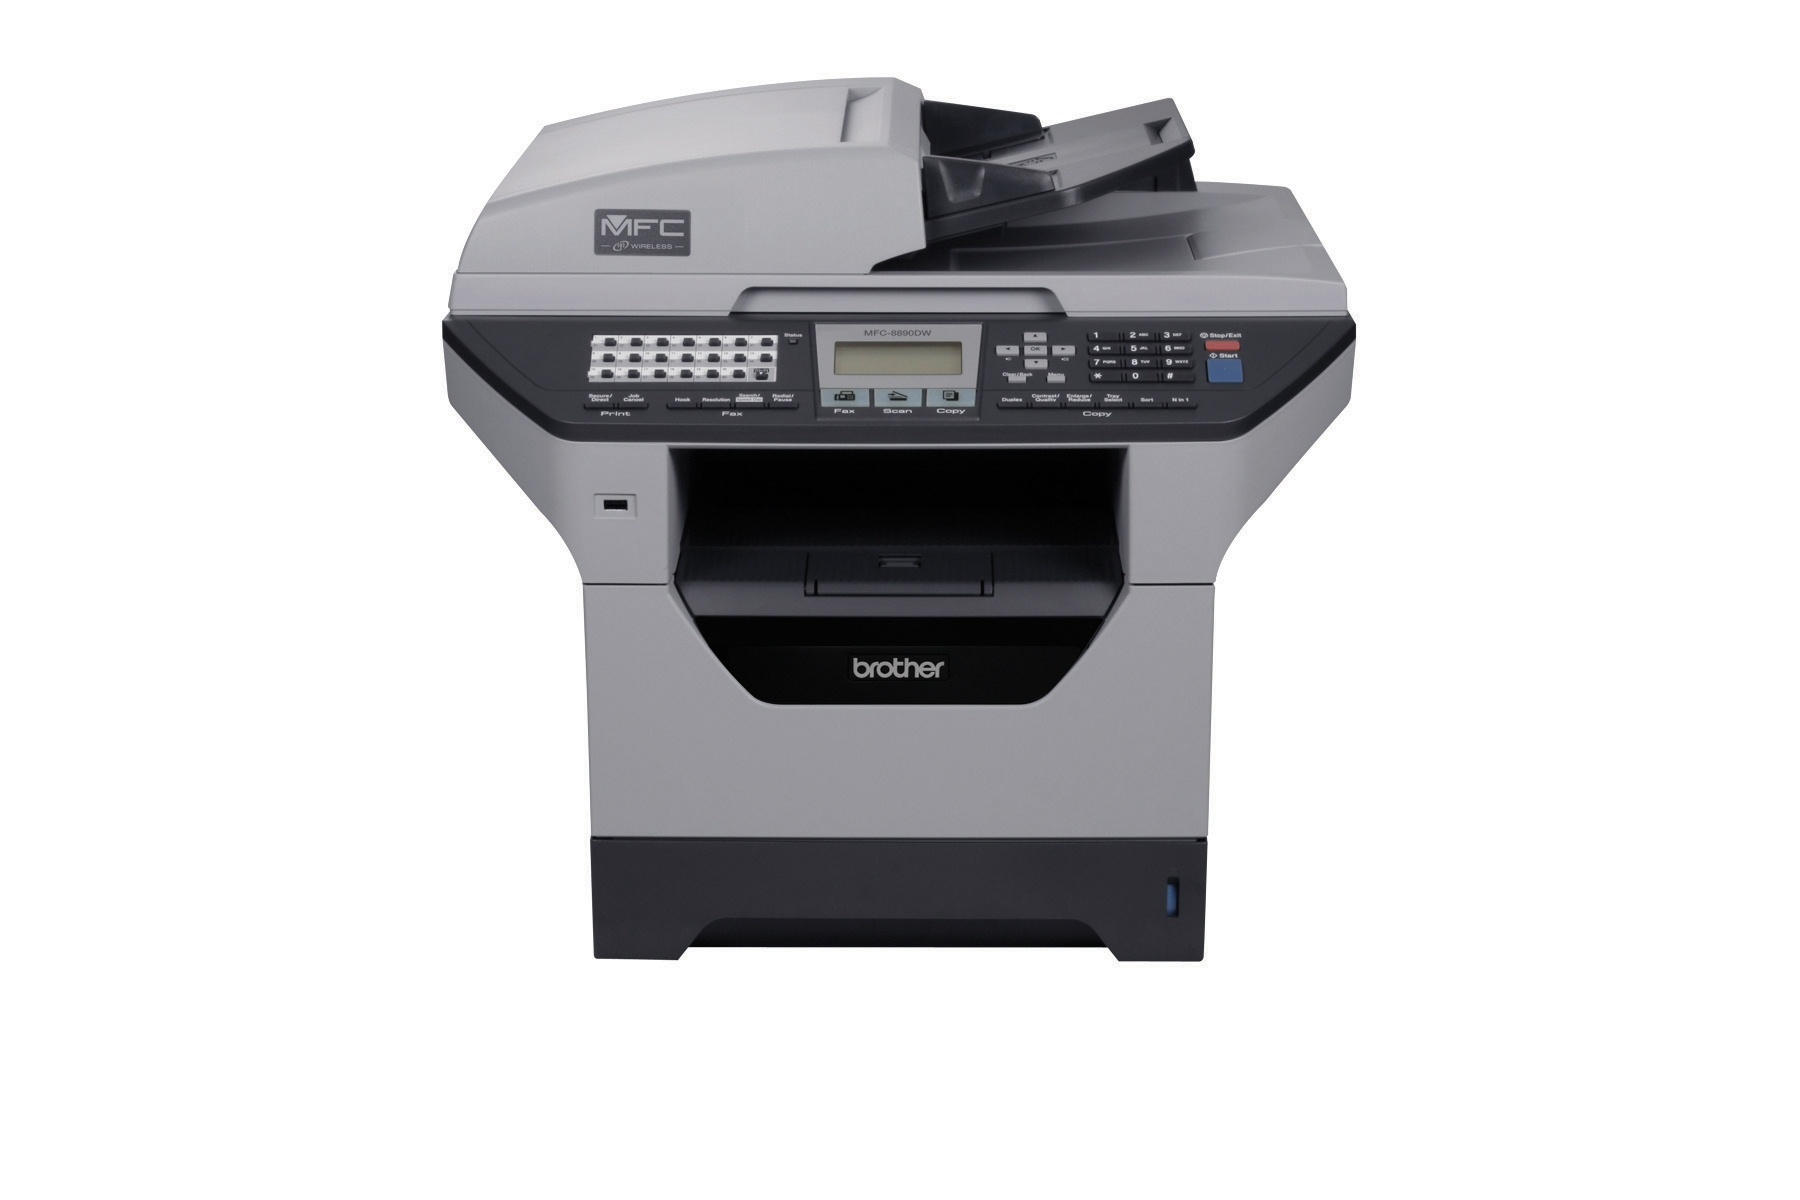 BROTHER MFC 8890DW PRINTER DRIVERS FOR MAC